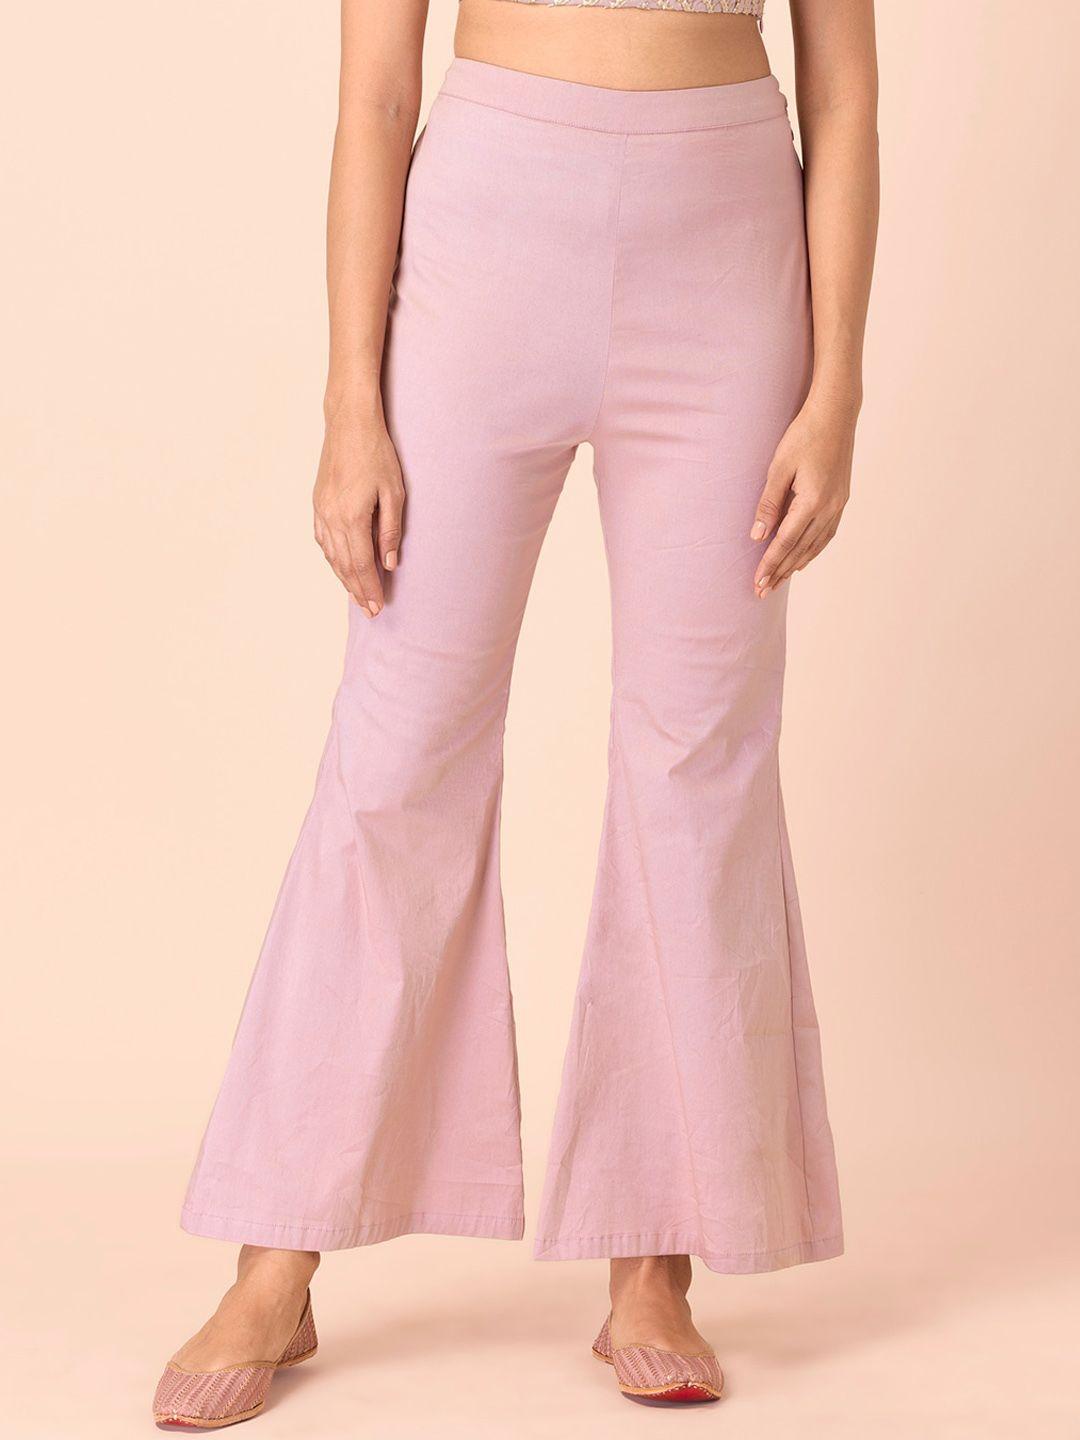 indya-women-rose-flared-mid-rise-stretch-trousers